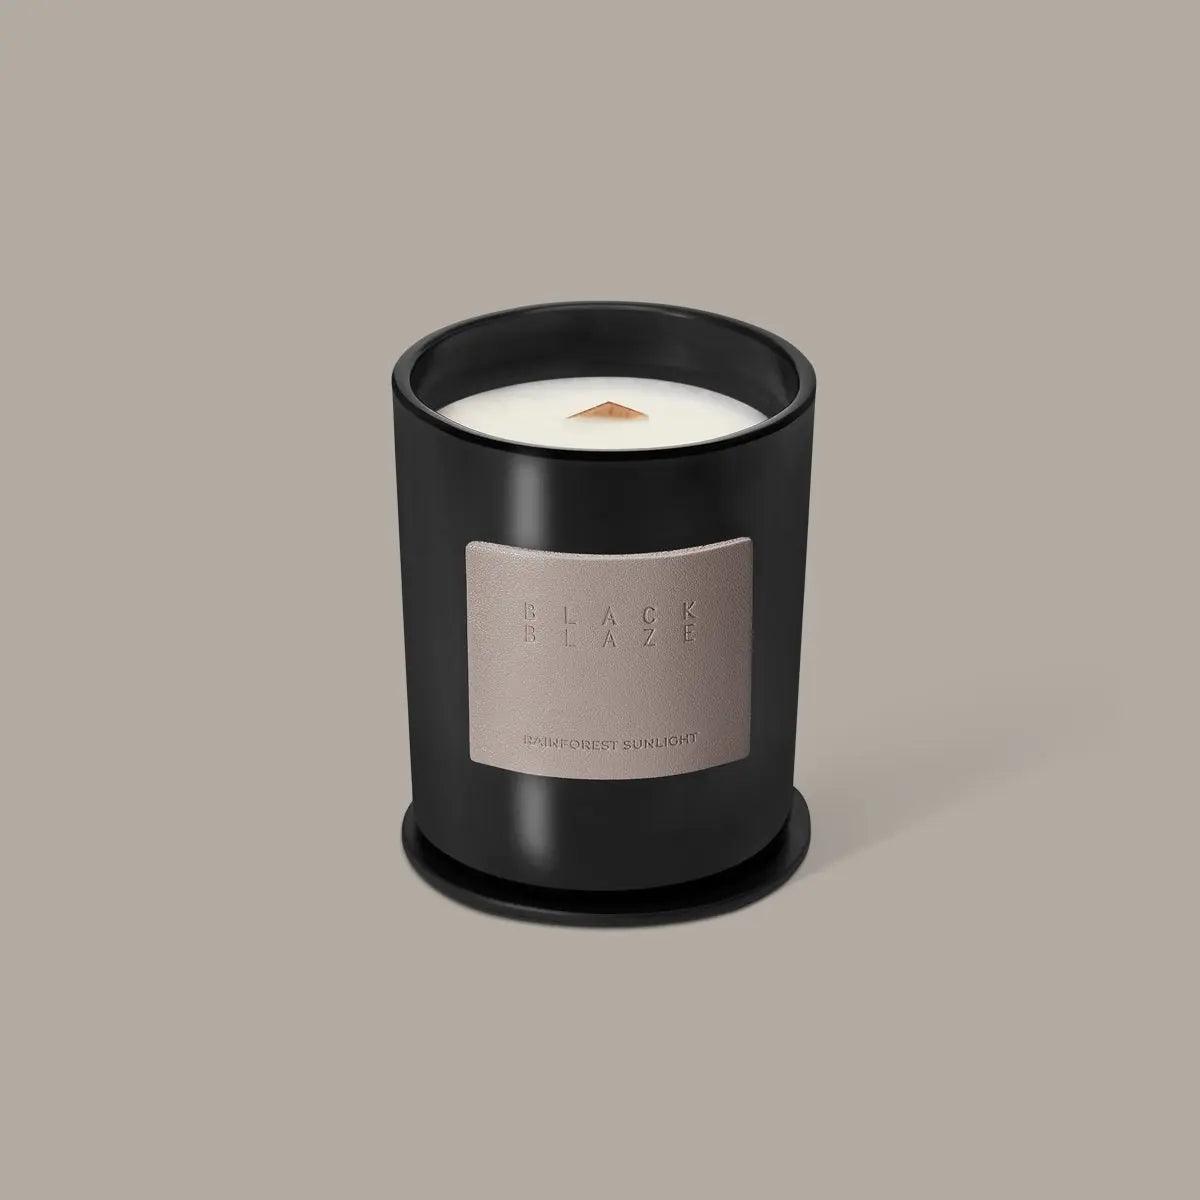 Rainforest Sunlight Scented Candle - BLACK BLAZE - THE GREAT OUTDOOR COLLECTION - BLACK BLAZE